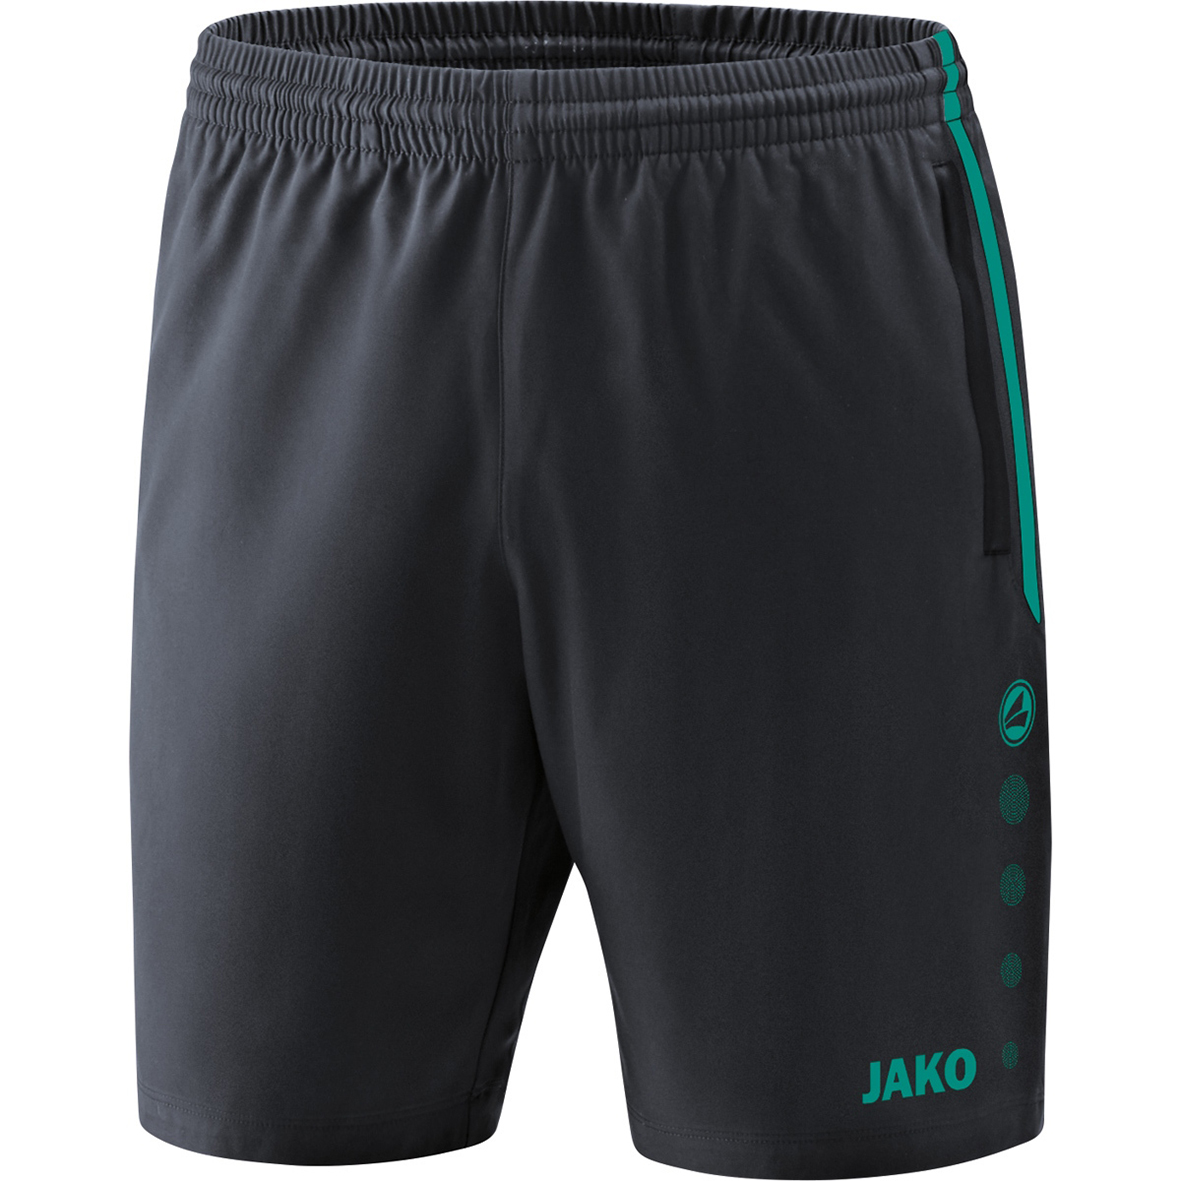 SHORTS JAKO COMPETITION 2.0, ANTHRACITE-TURQUOISE KIDS.